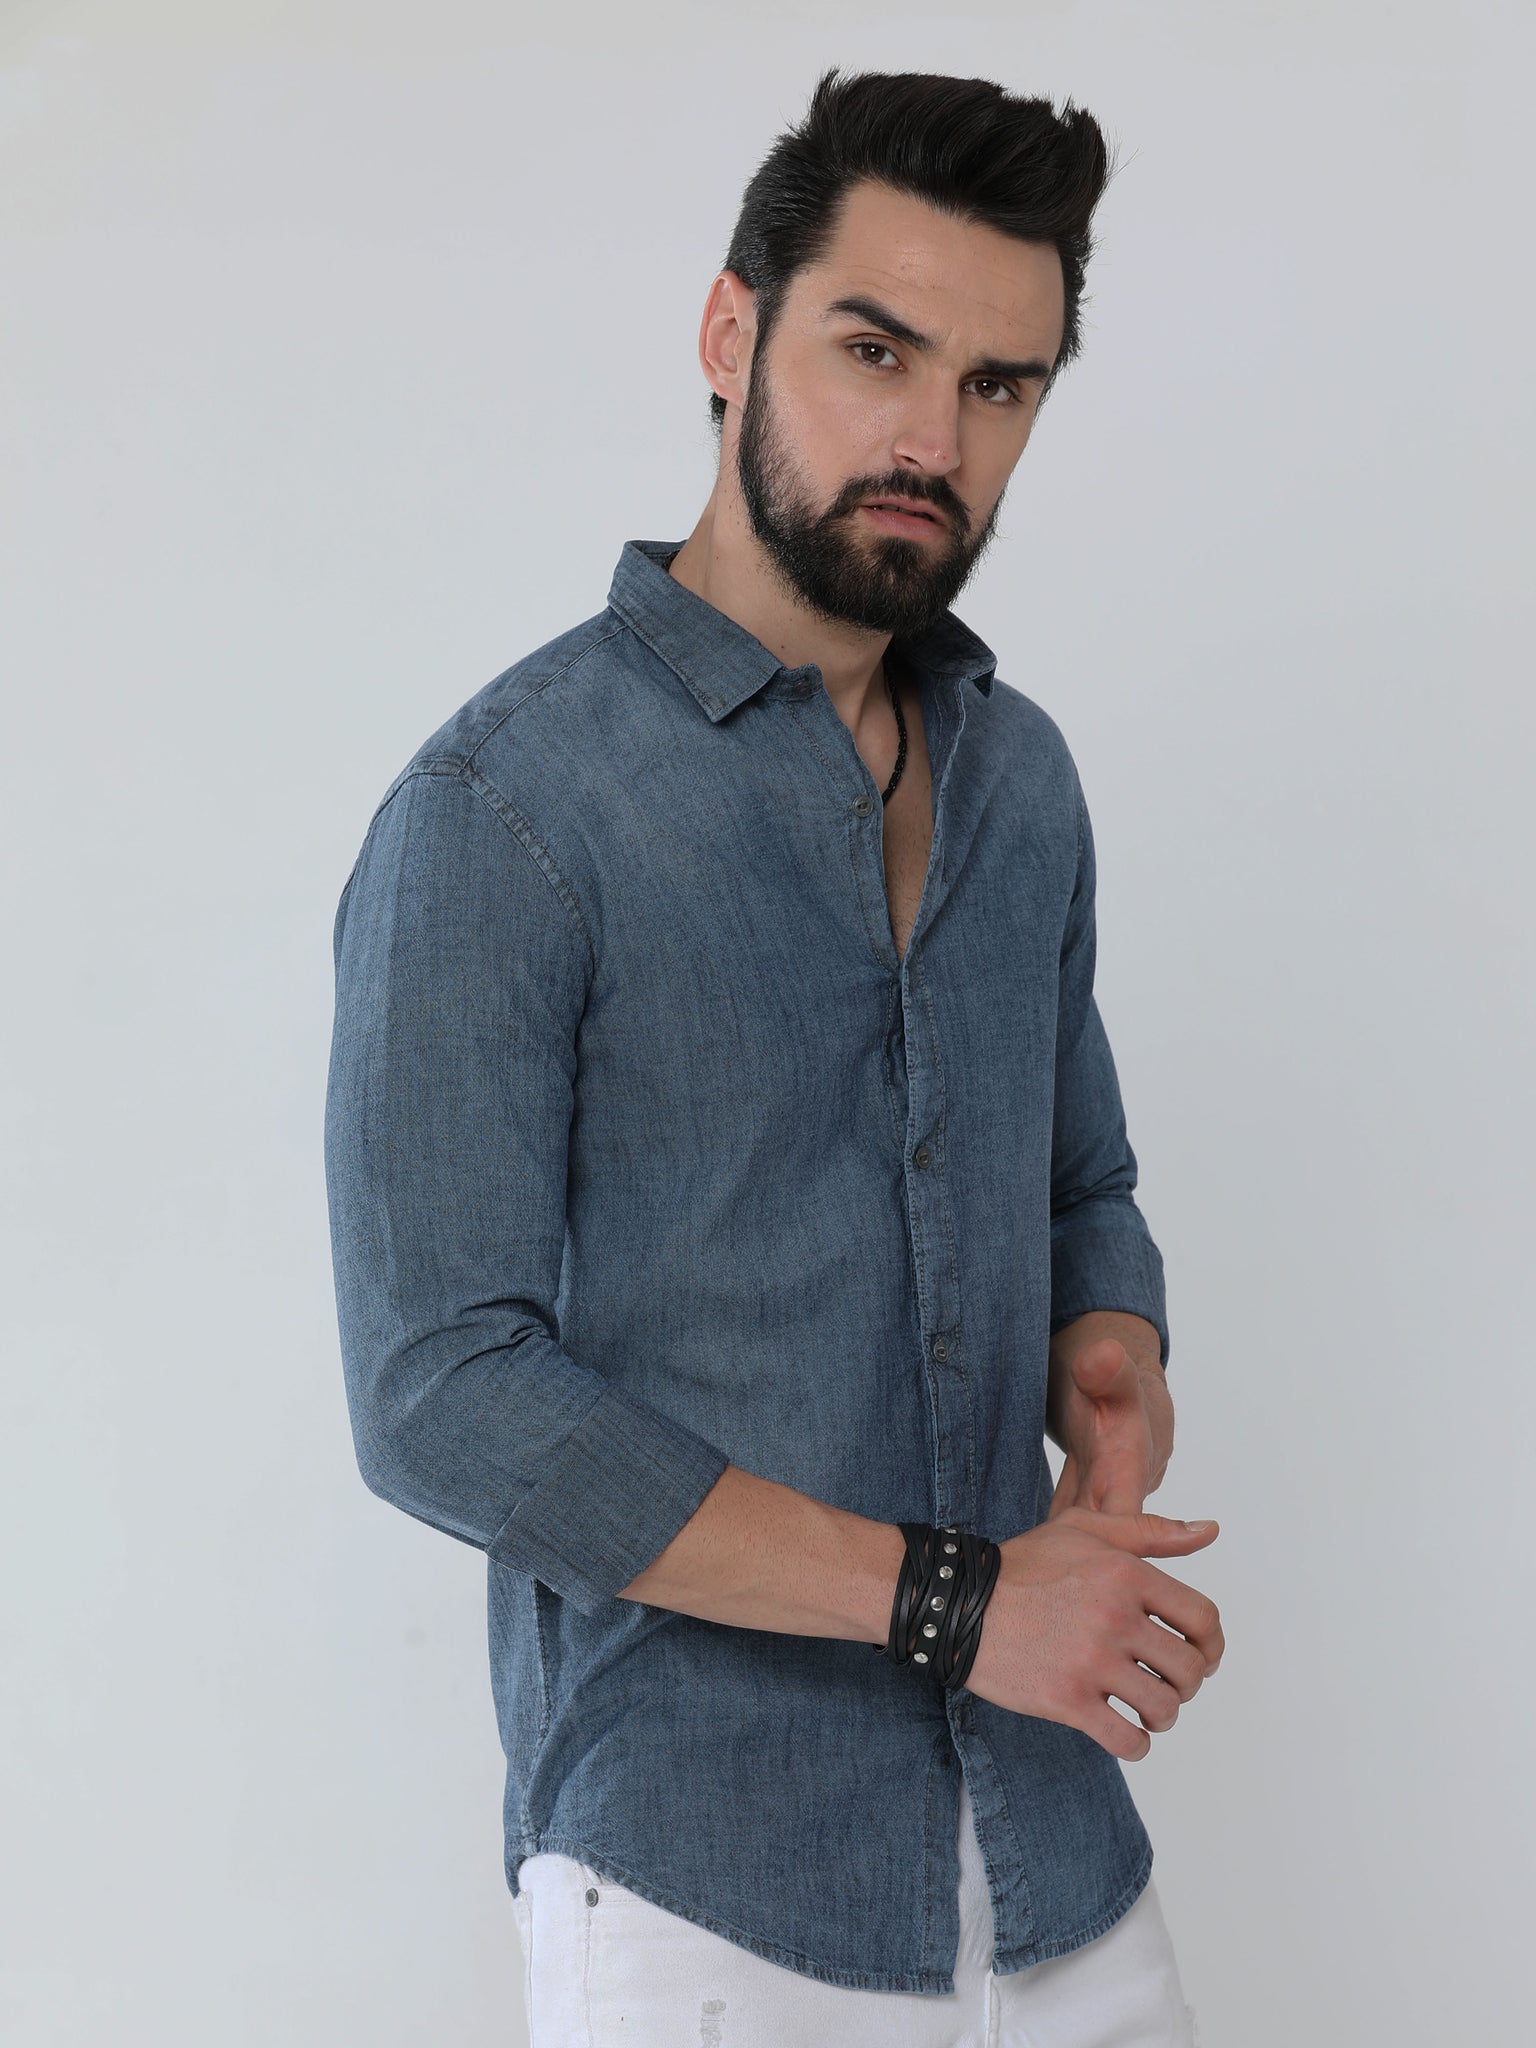 Buy Southbay Mens Full Sleeves Blue Casual Shirt online